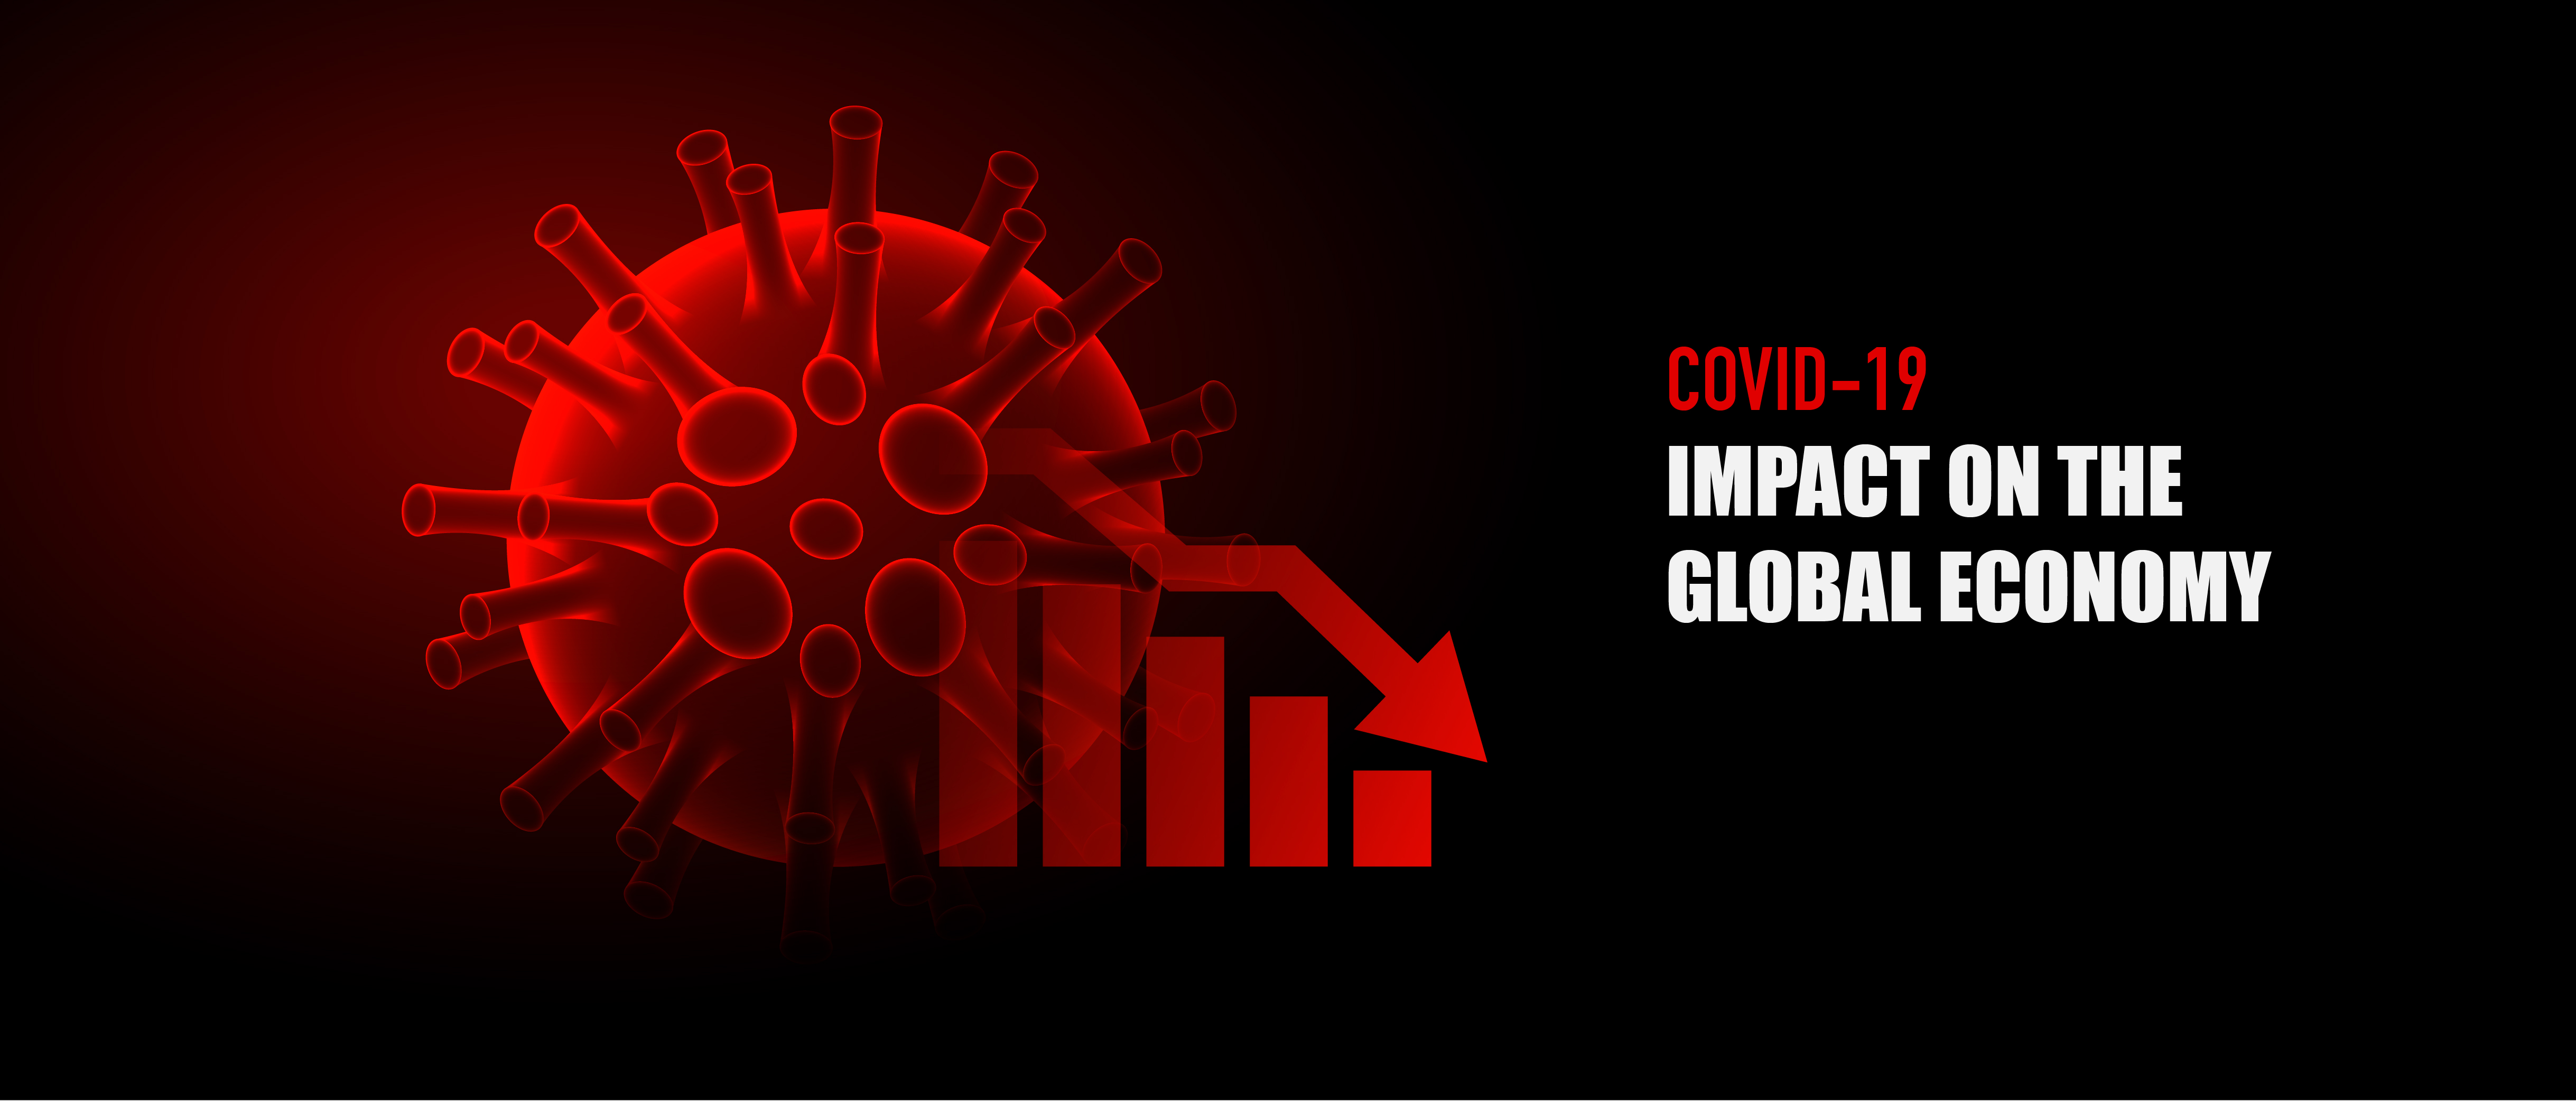 COVID-19 and its Impact on the Global Economy